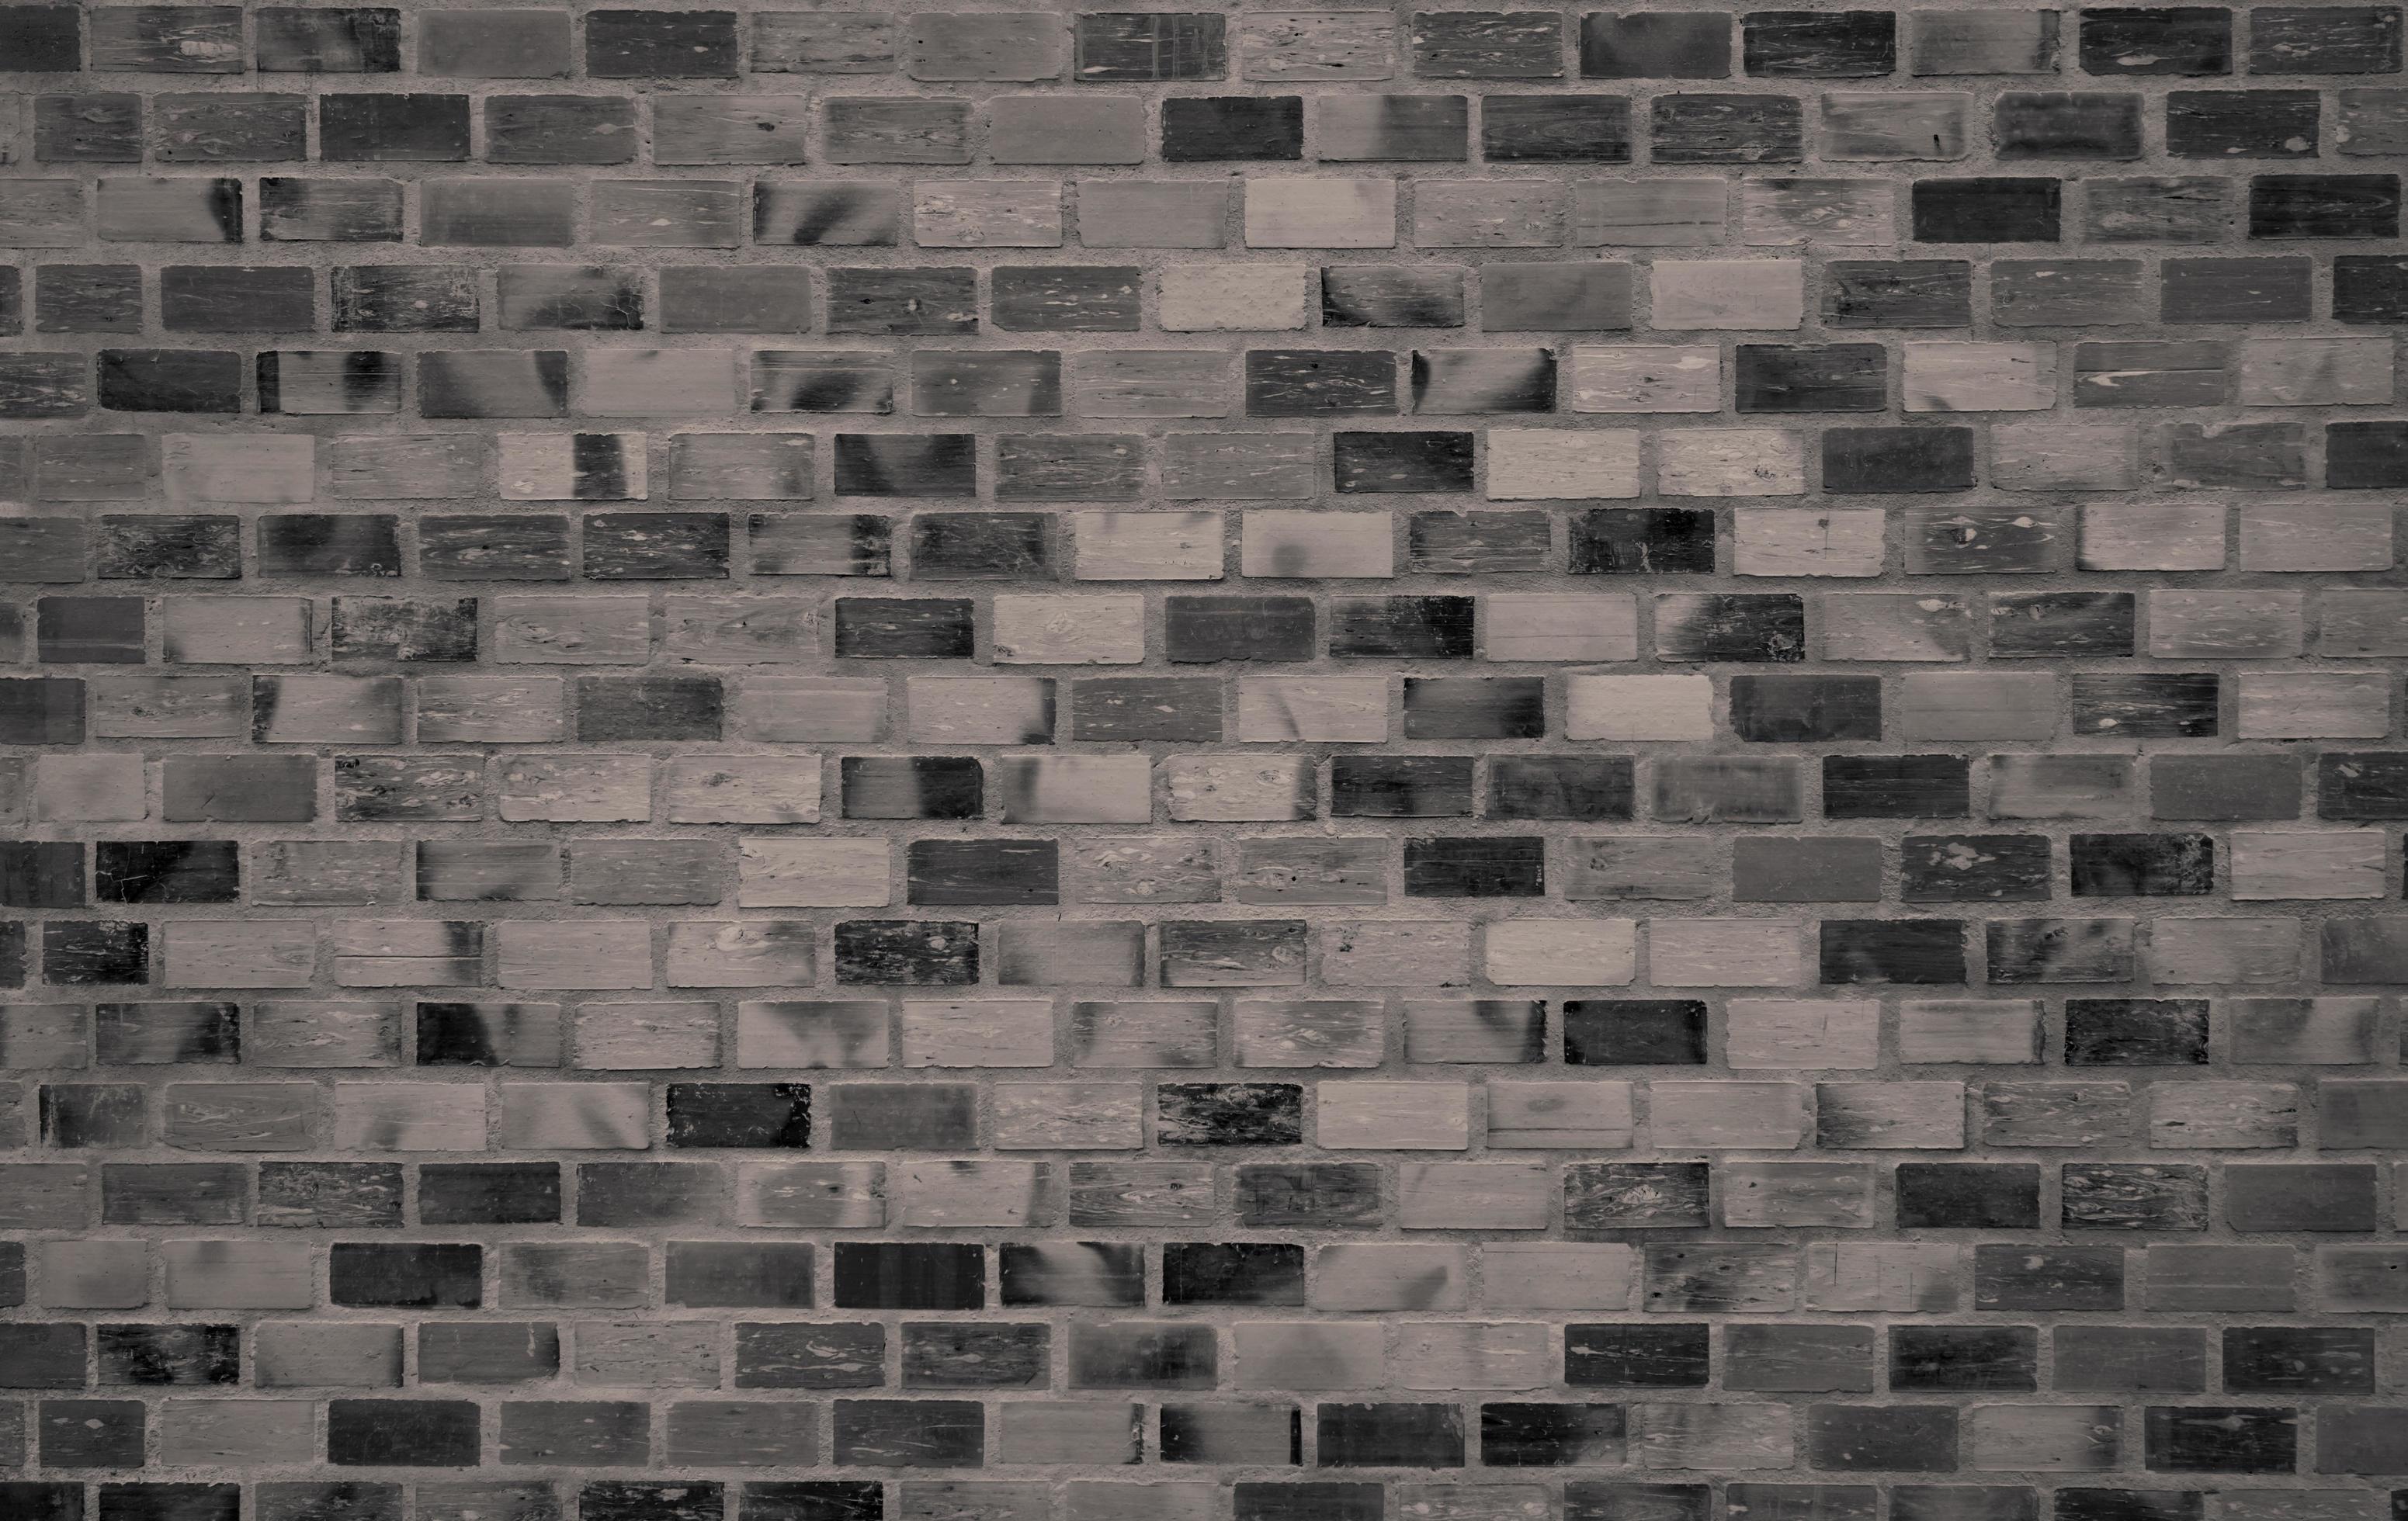 Dark brick wall texture background. Old vintage pattern wallpaper. Grunge  brick wall interior building architecture. Rough brick wall texture. Loft  style home interior design. Black and gray wall 7790328 Stock Photo at